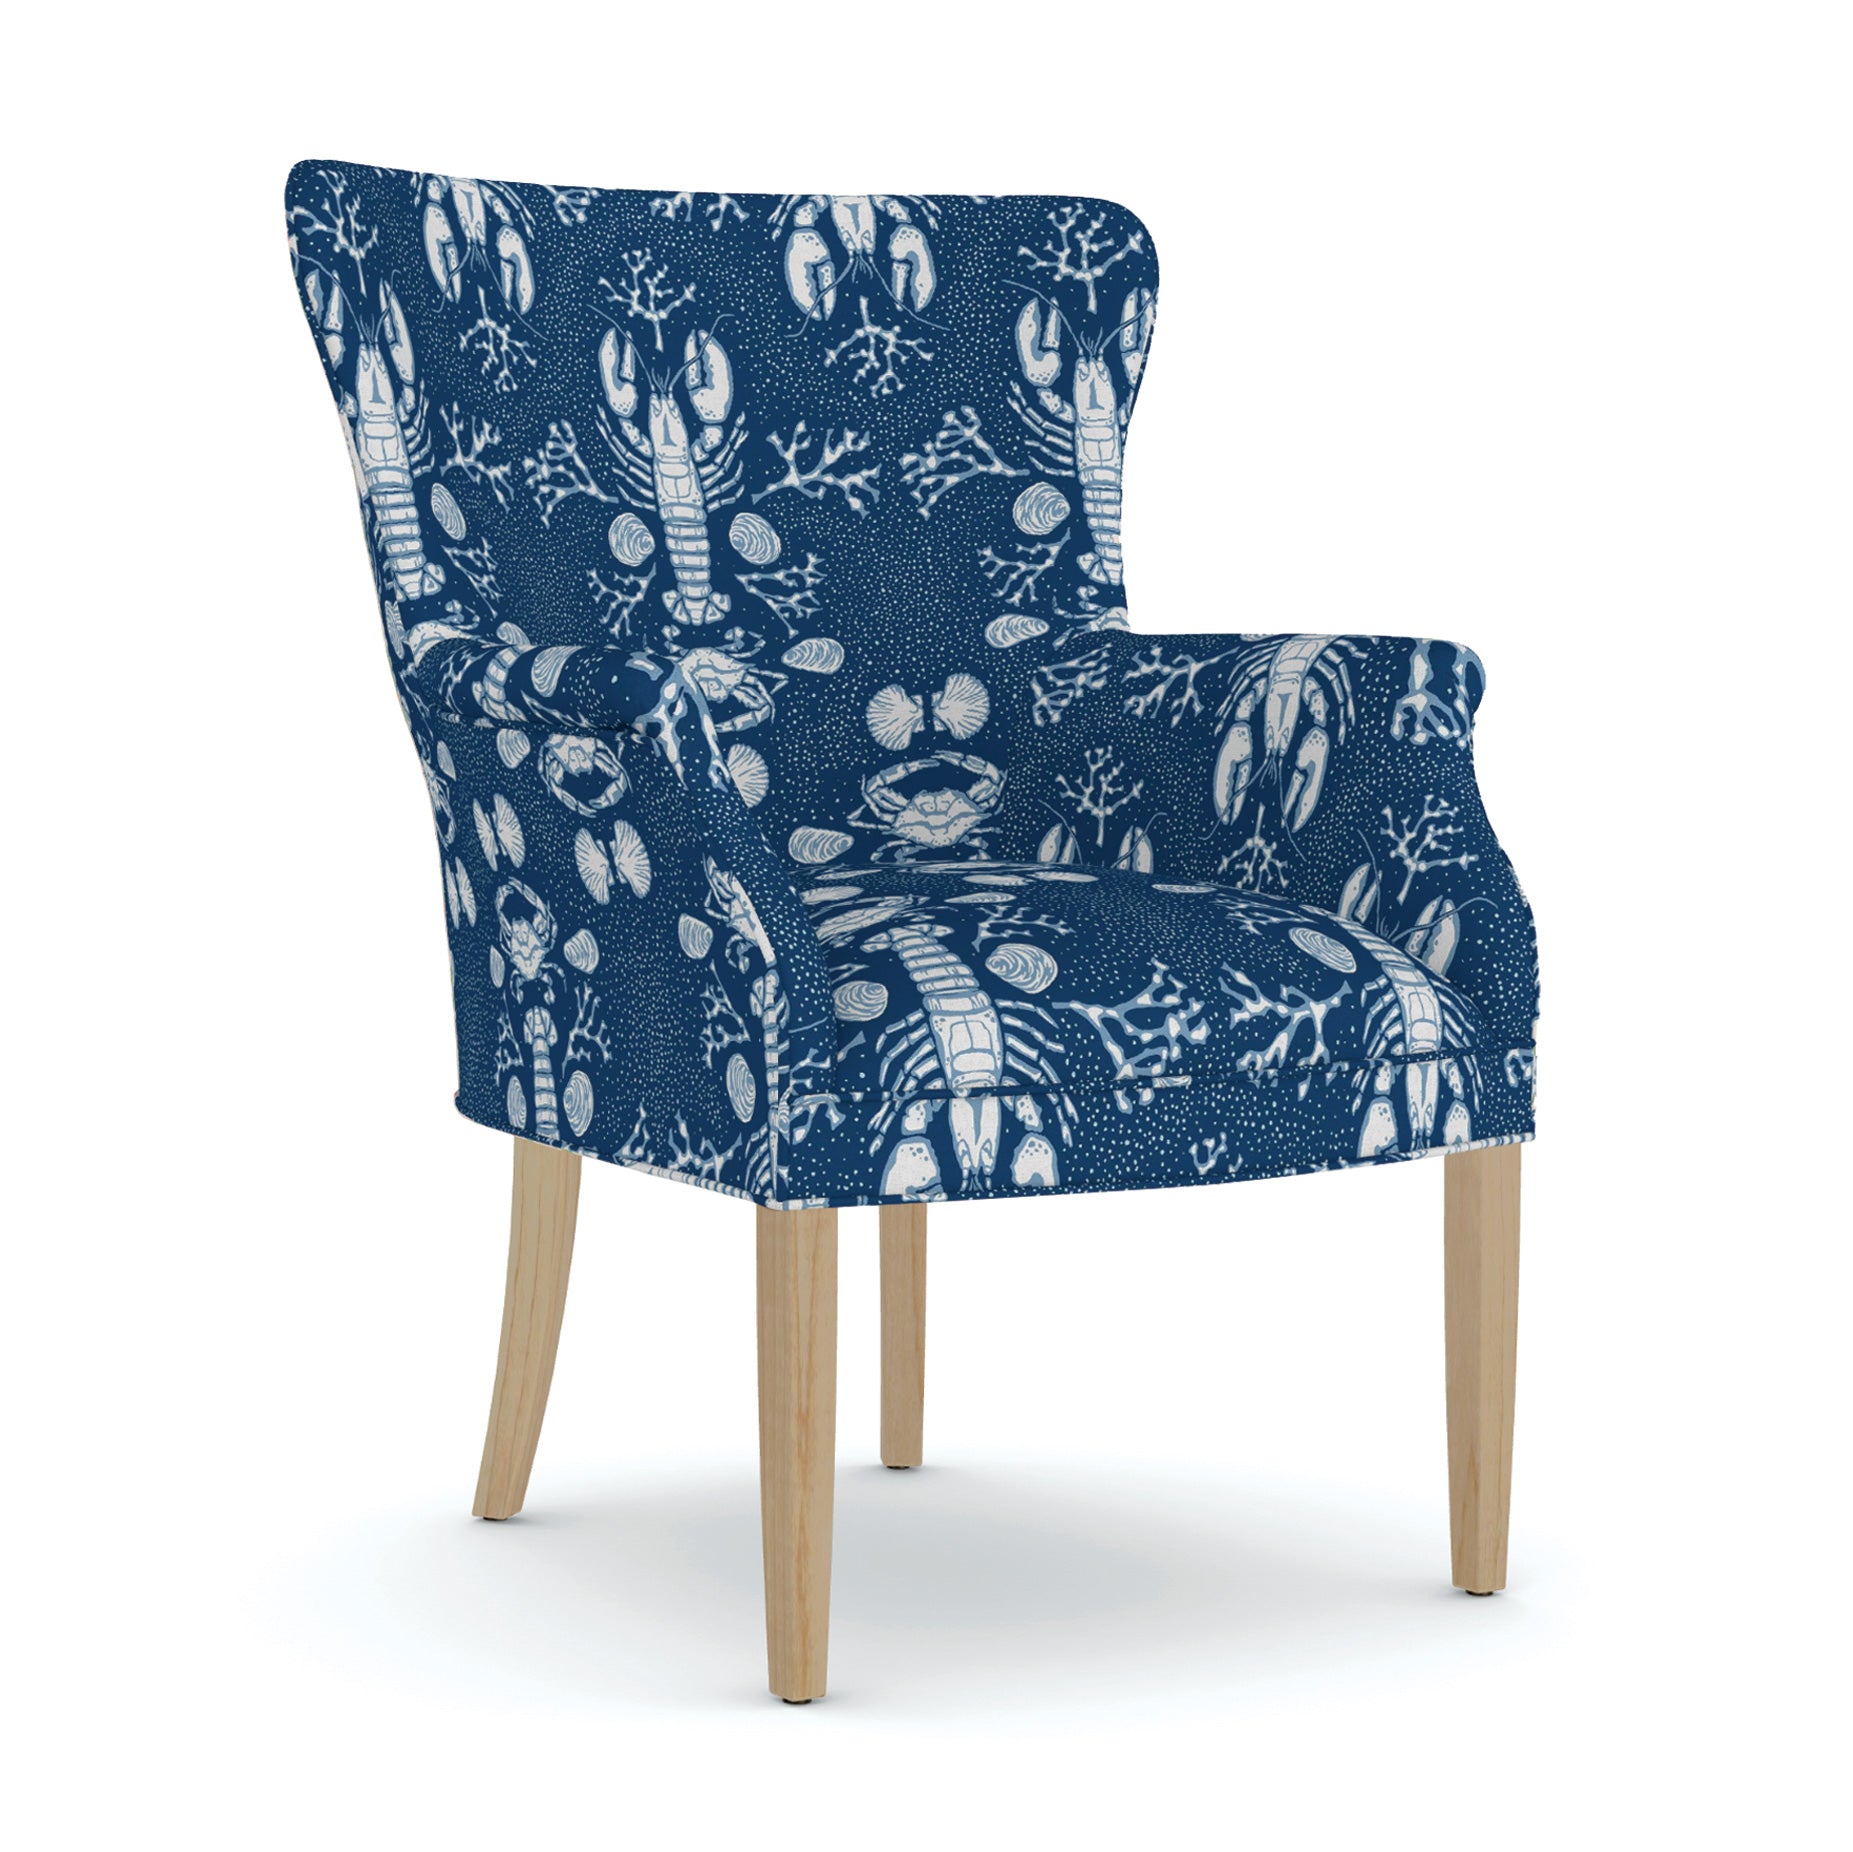 Maine Cottage Piper Chair | Colorful Fabric Upholstered Wingback Chair 